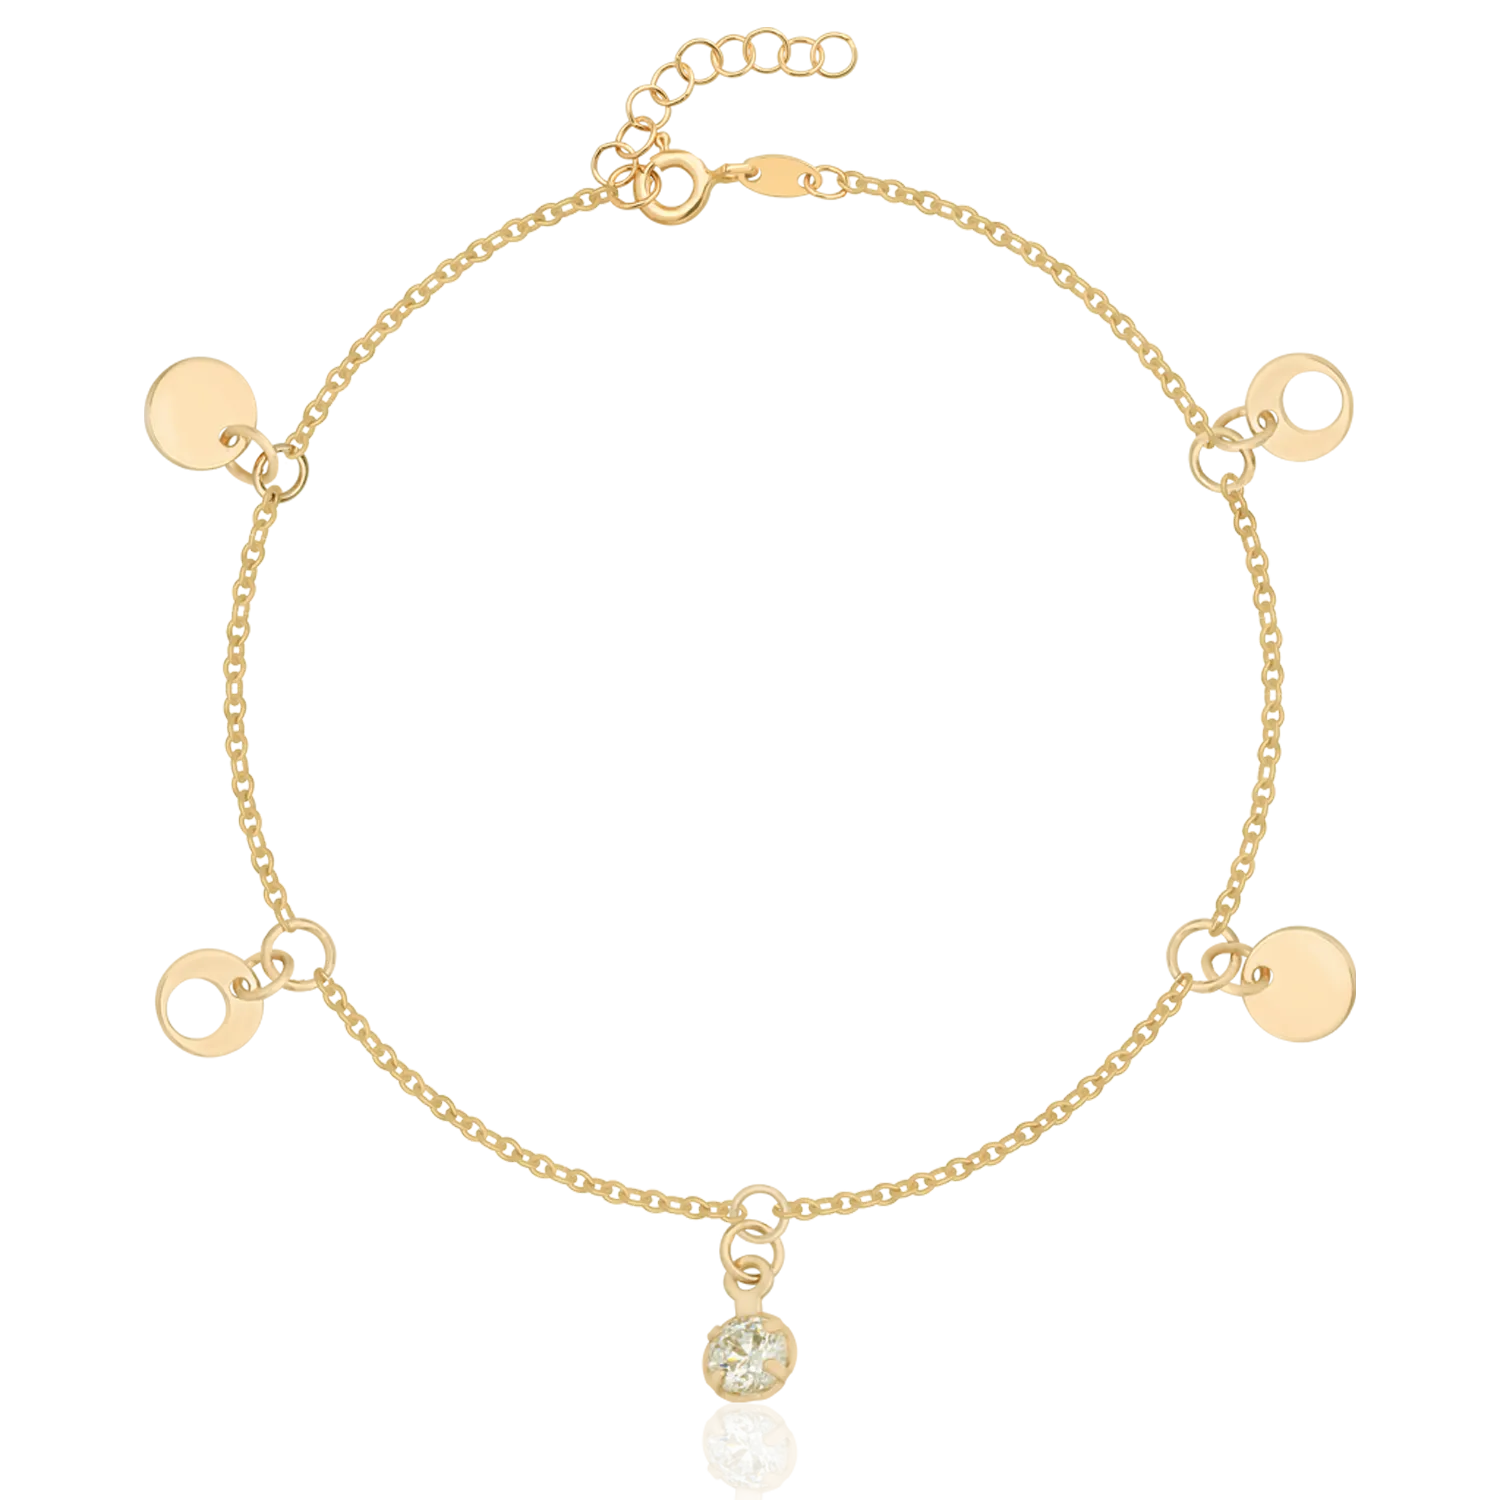 14K yellow gold ankle bracelet with charms